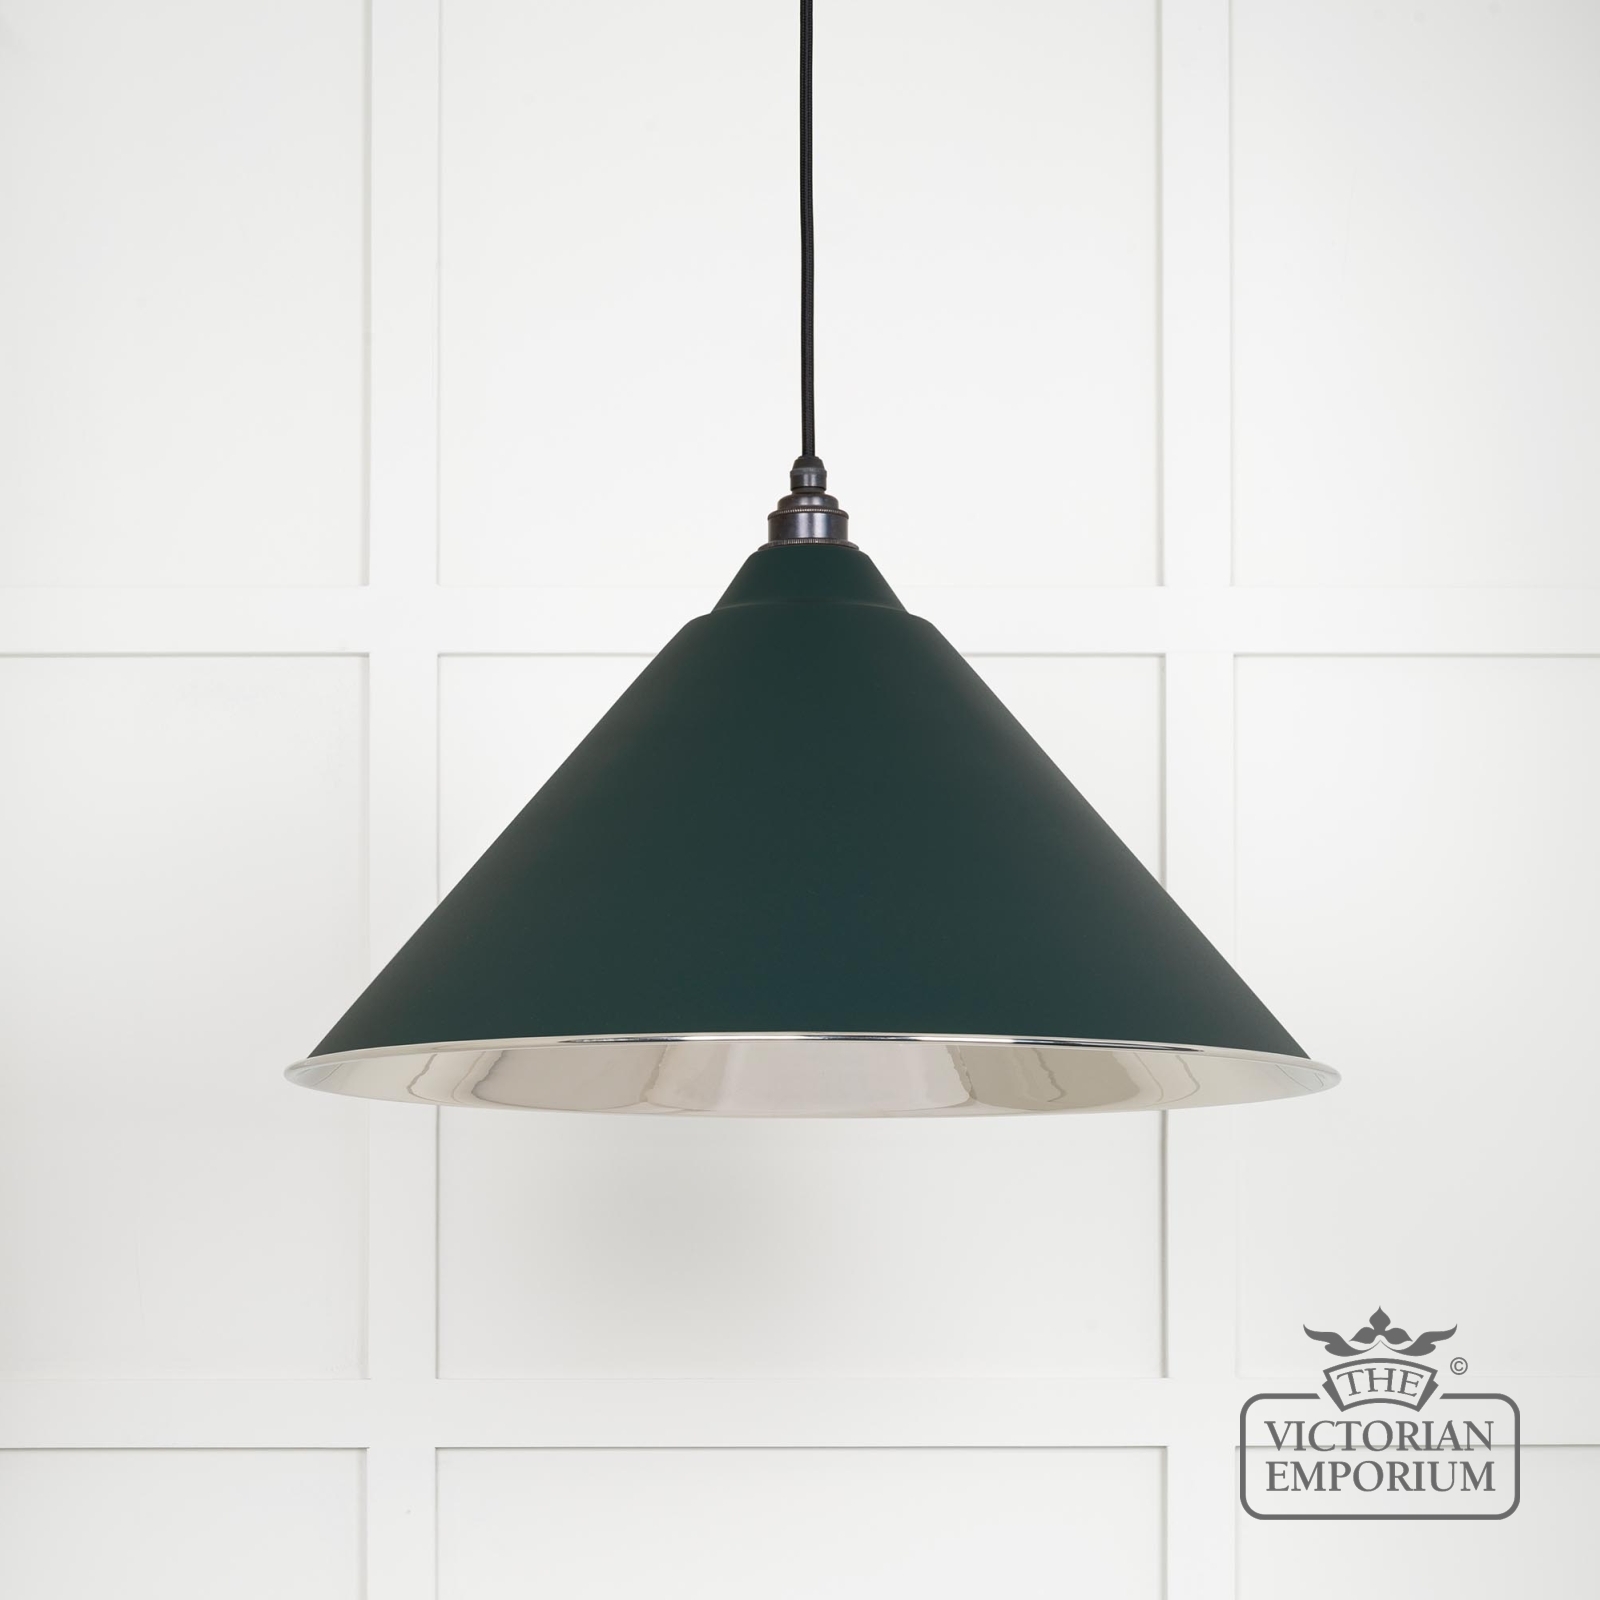 Hockliffe Pendant Light in Smooth Nickel and Dingle Exterior